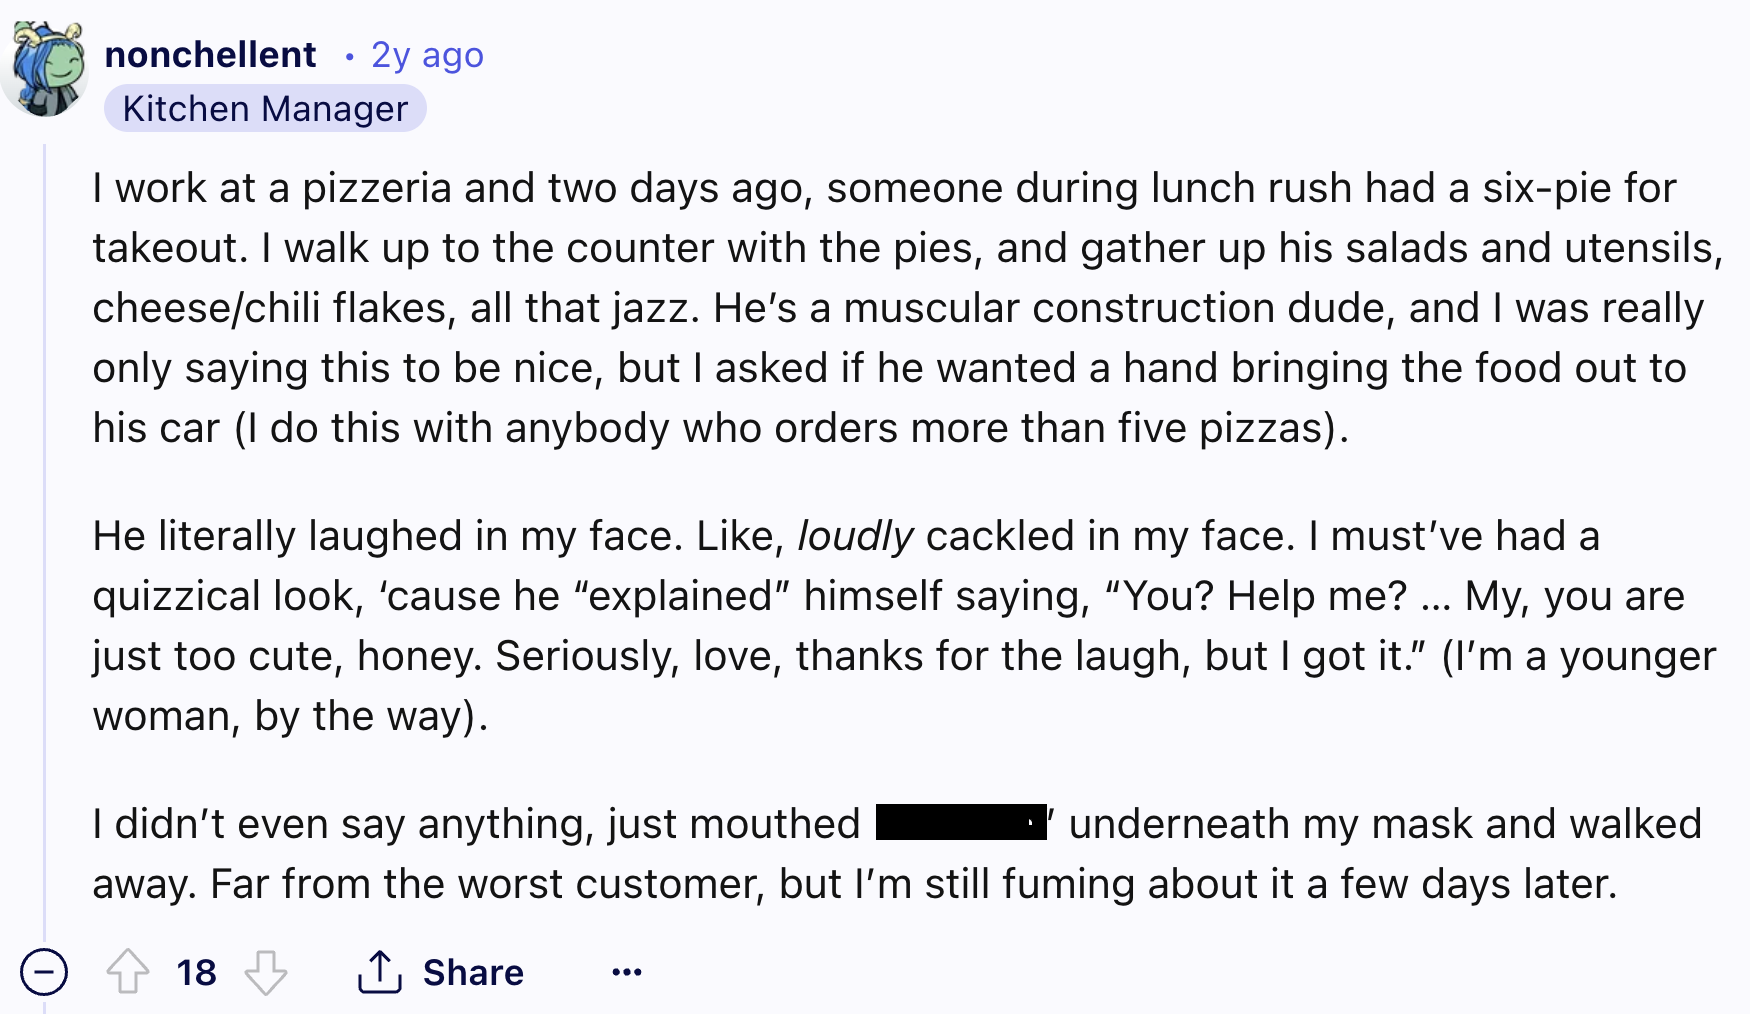 screenshot - nonchellent 2y ago Kitchen Manager I work at a pizzeria and two days ago, someone during lunch rush had a sixpie for takeout. I walk up to the counter with the pies, and gather up his salads and utensils, cheesechili flakes, all that jazz. He